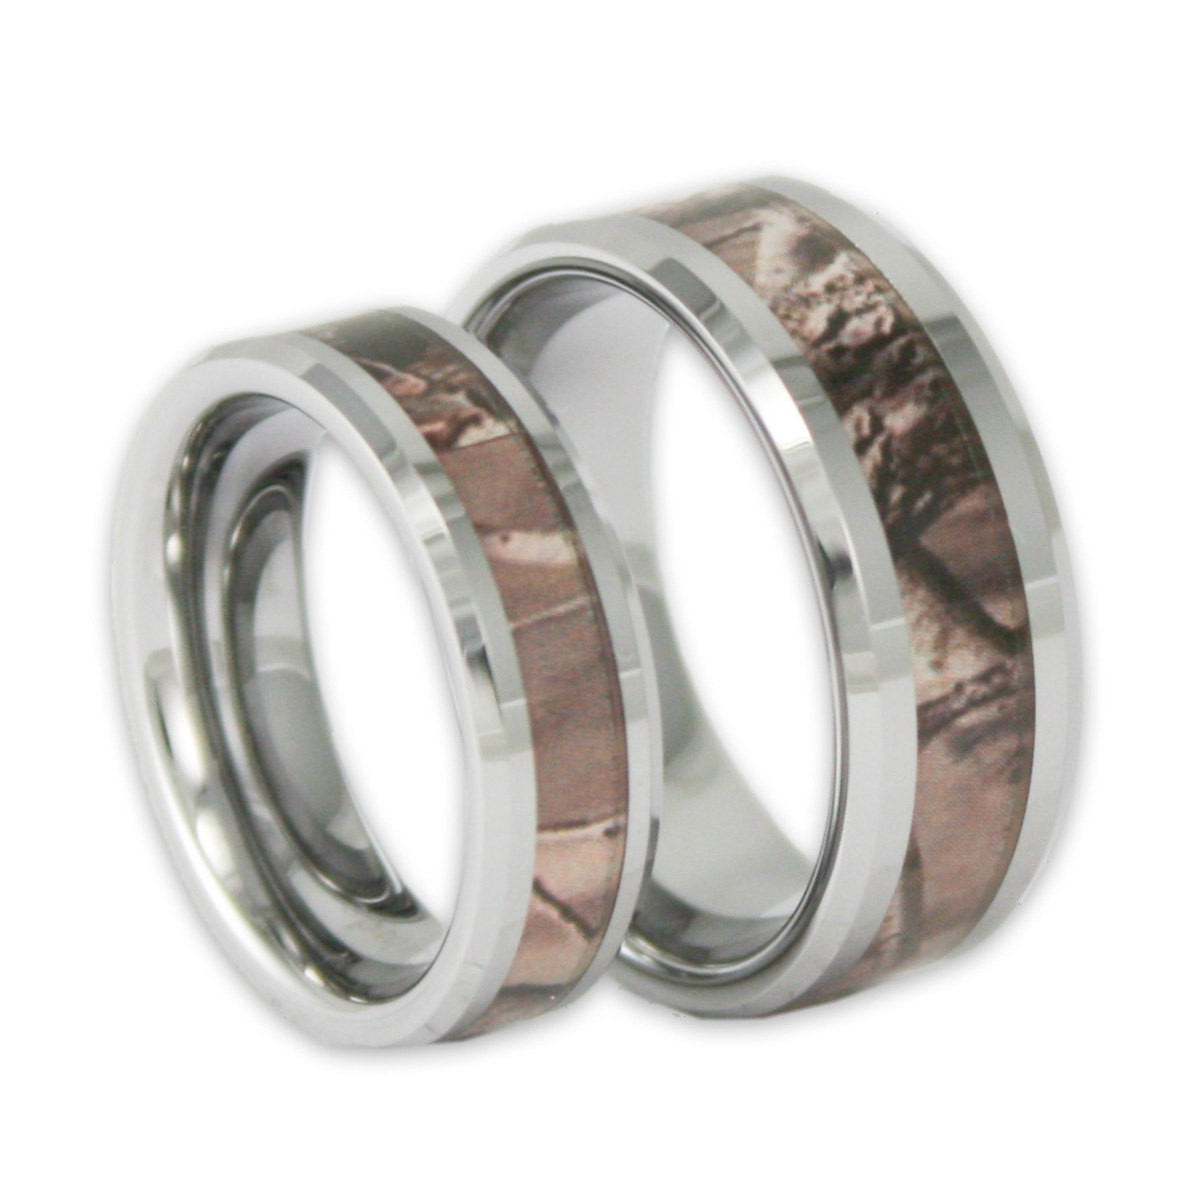 Camo Wedding Band Sets
 Couples Tree Camo Wedding Ring Set His and Hers Matching